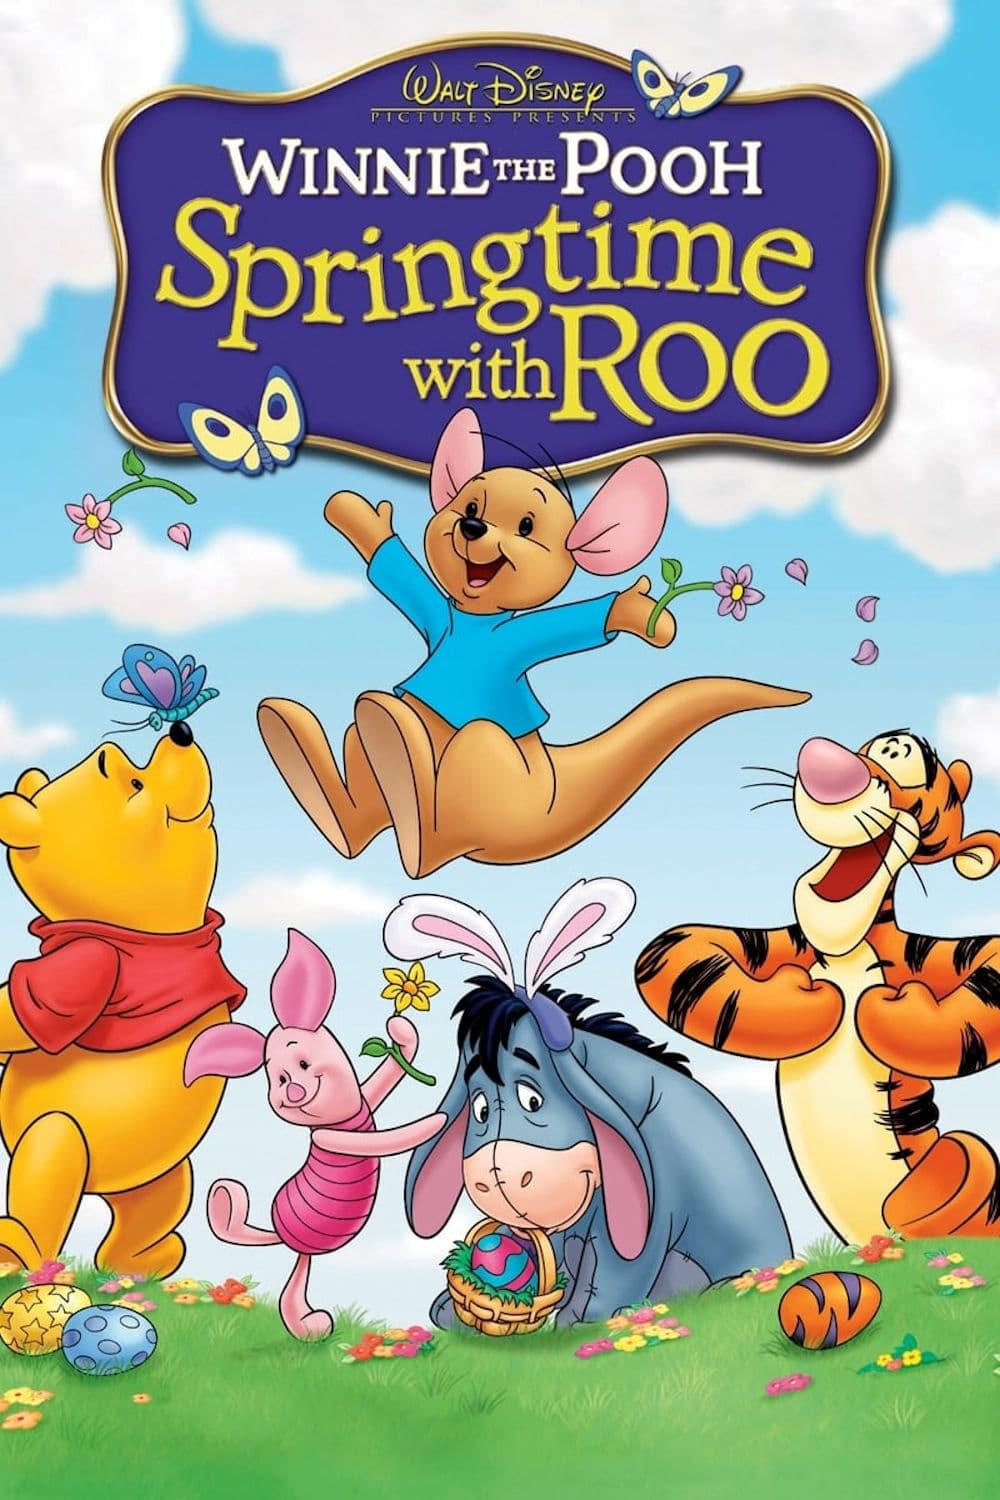 Winnie the Pooh: Springtime with Roo poster